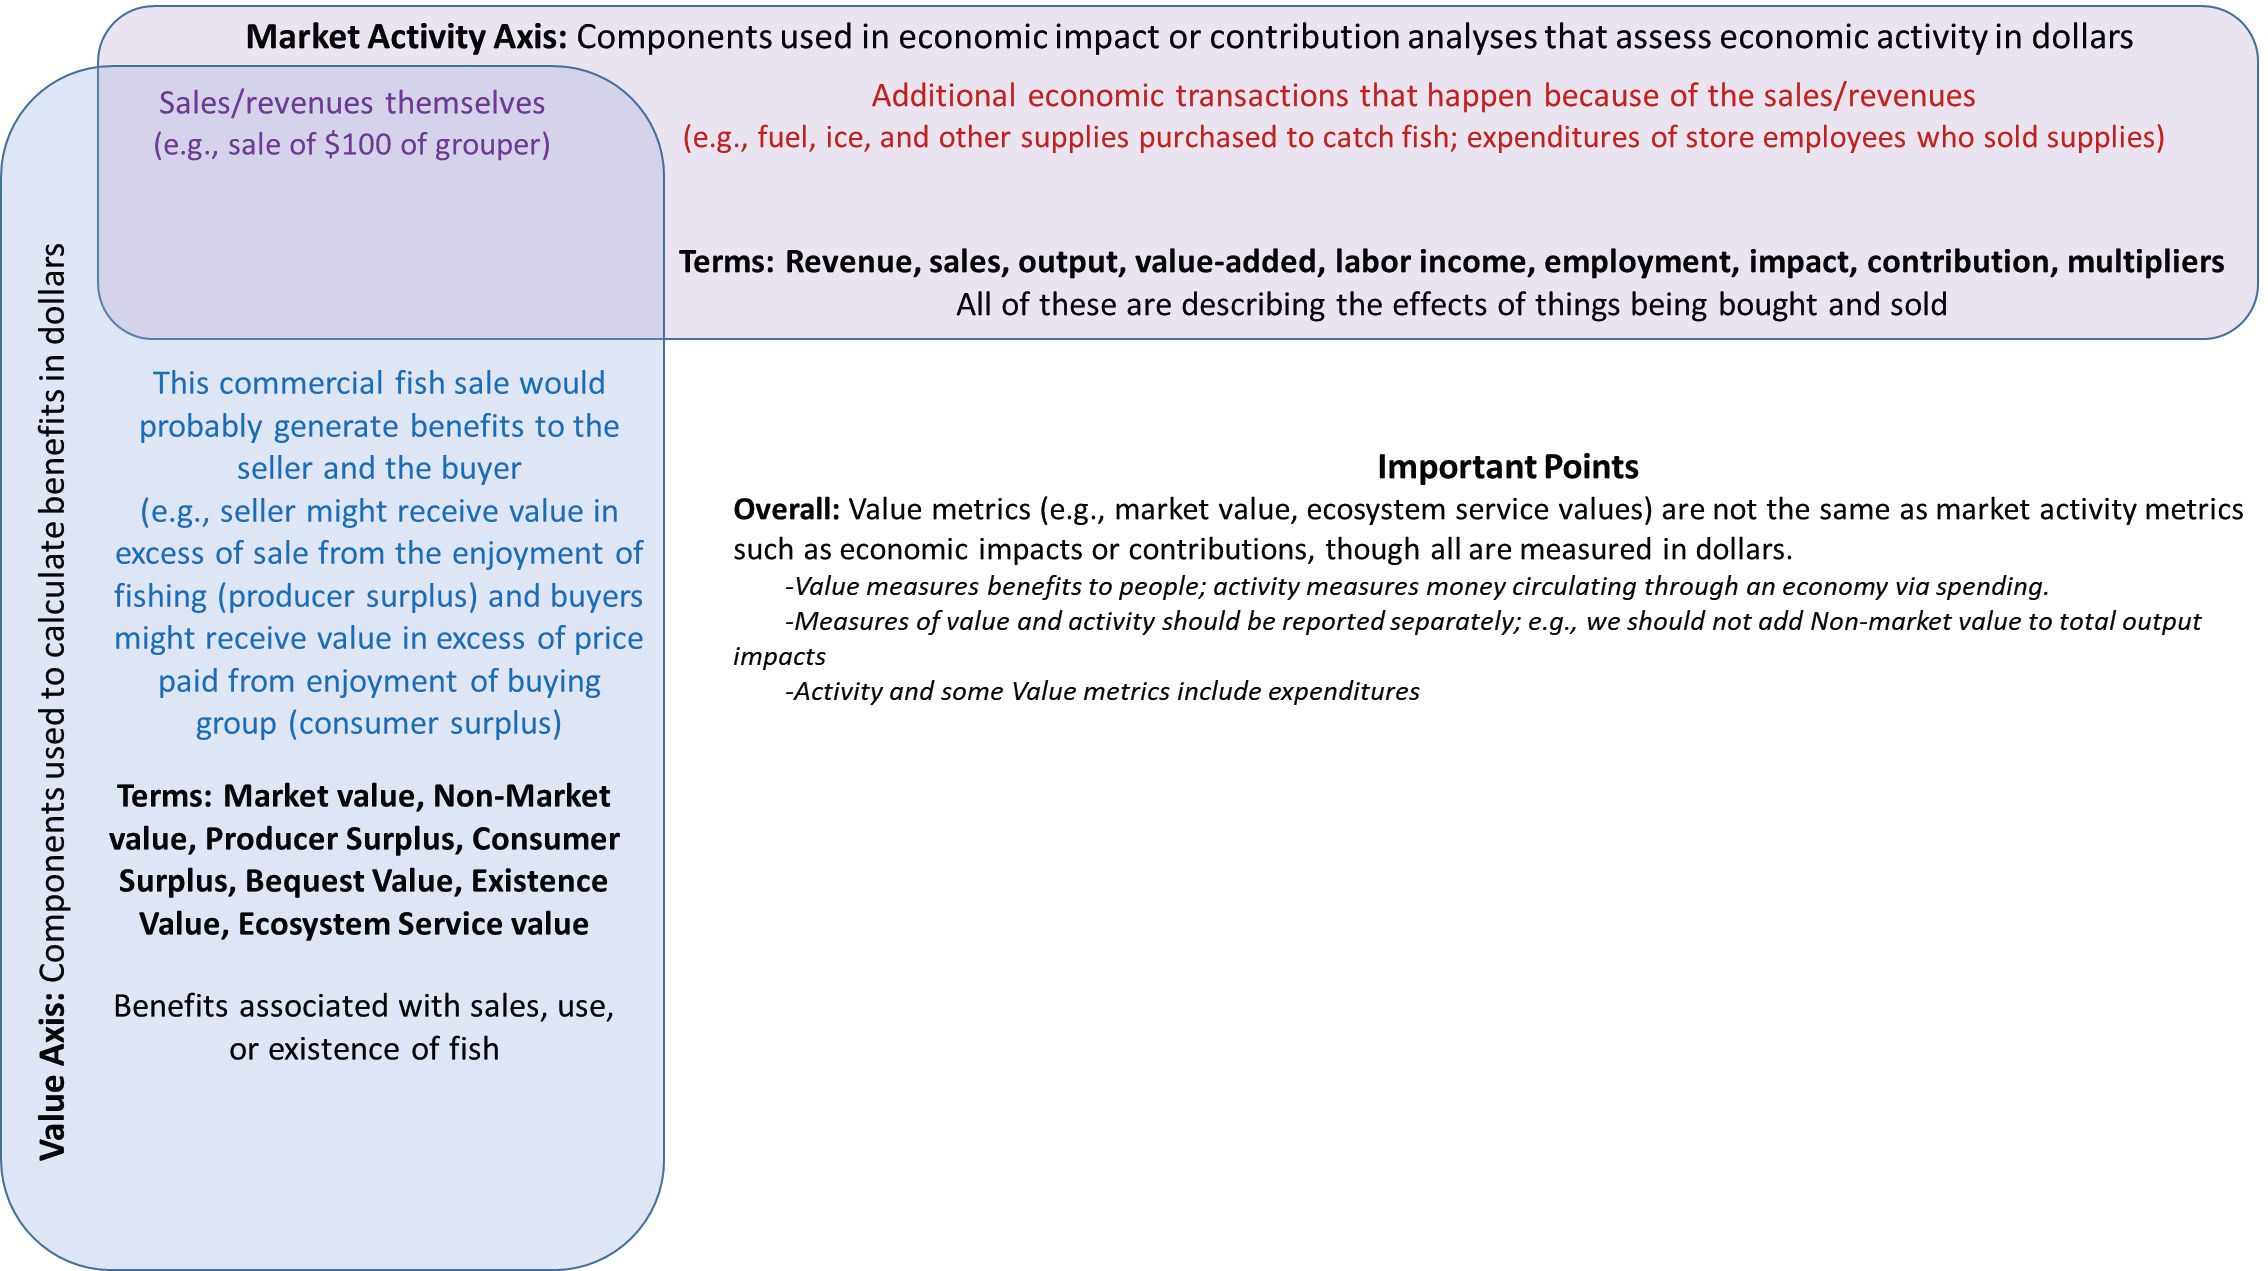 A simple economic metric framework. The market activity axis (horizontal, pink bubble) describes market activity, or spending, and the value axis (vertical, blue bubble) describes economic value, or benefits. The terms included for each are almost always specific to their axis—meaning that market activity axis terms would not describe value measures, and vice versa. The purple text illustrates how the two axes can overlap with spending; for exam